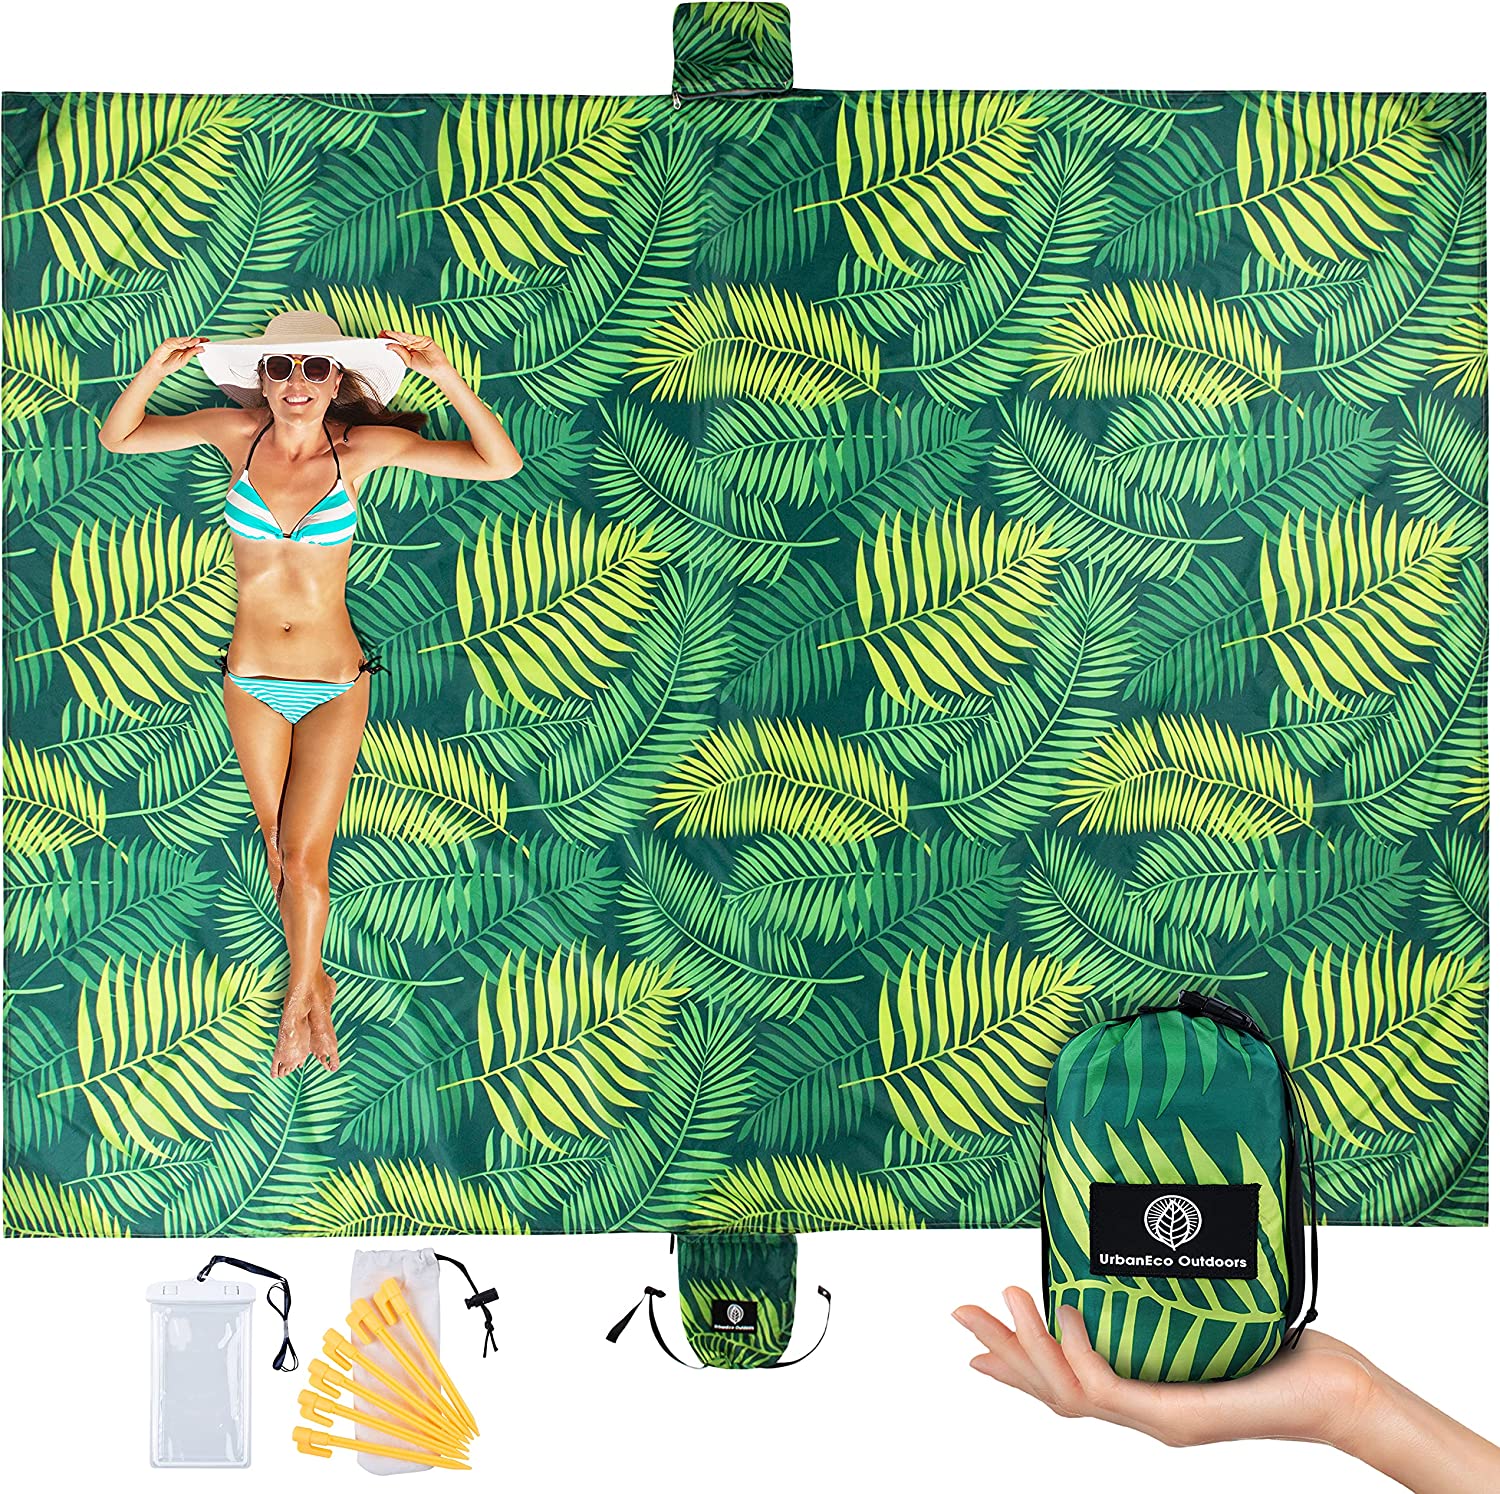 Oversized 107" x 77" - Waterproof Sandproof - Double Anchored for Fun Leisure Beach Blanket - With Stake Pouch and Plastic Stakes